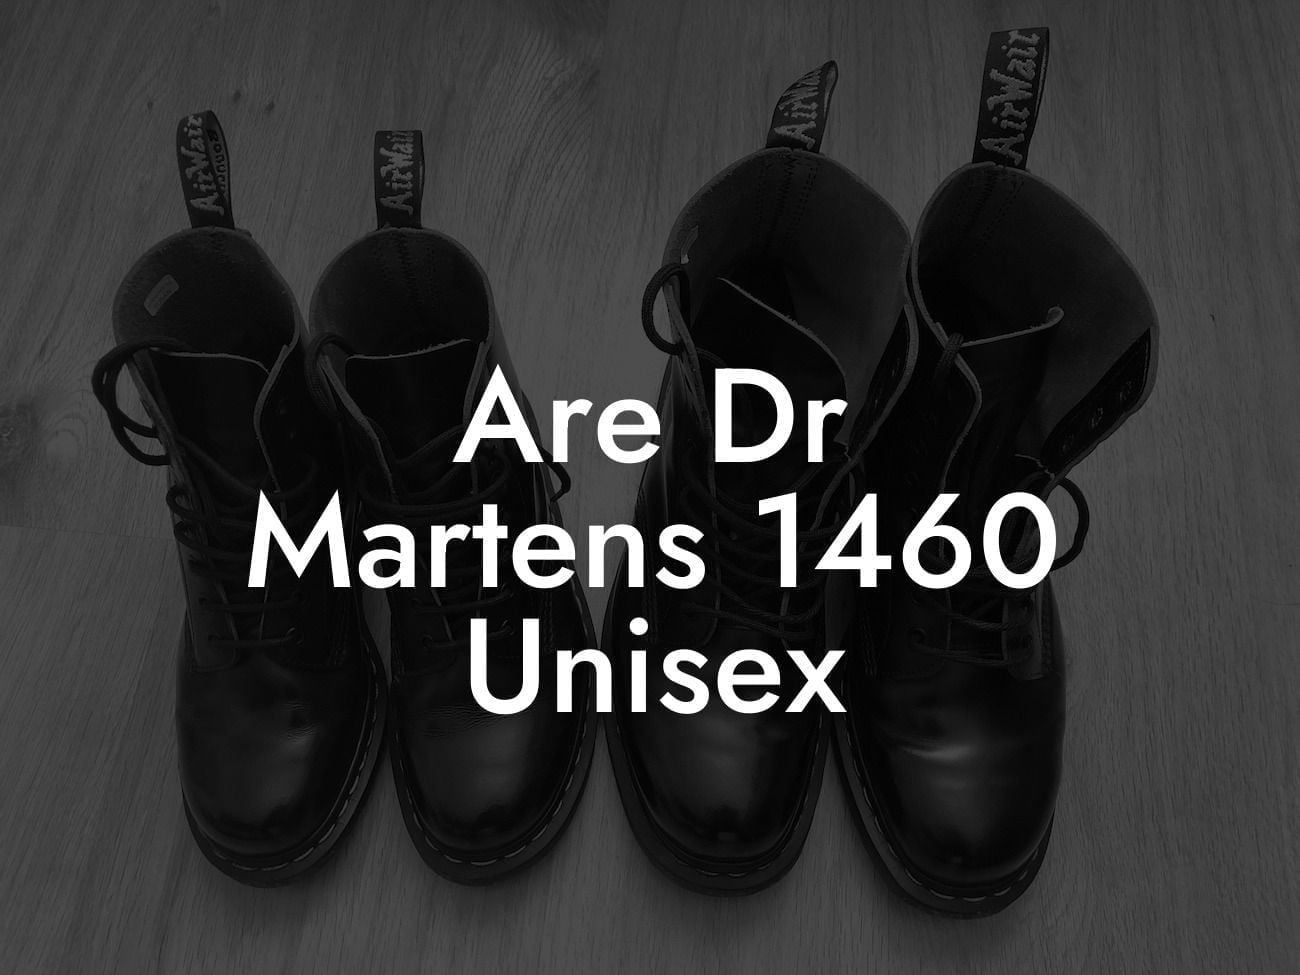 Are Dr Martens 1460 Unisex